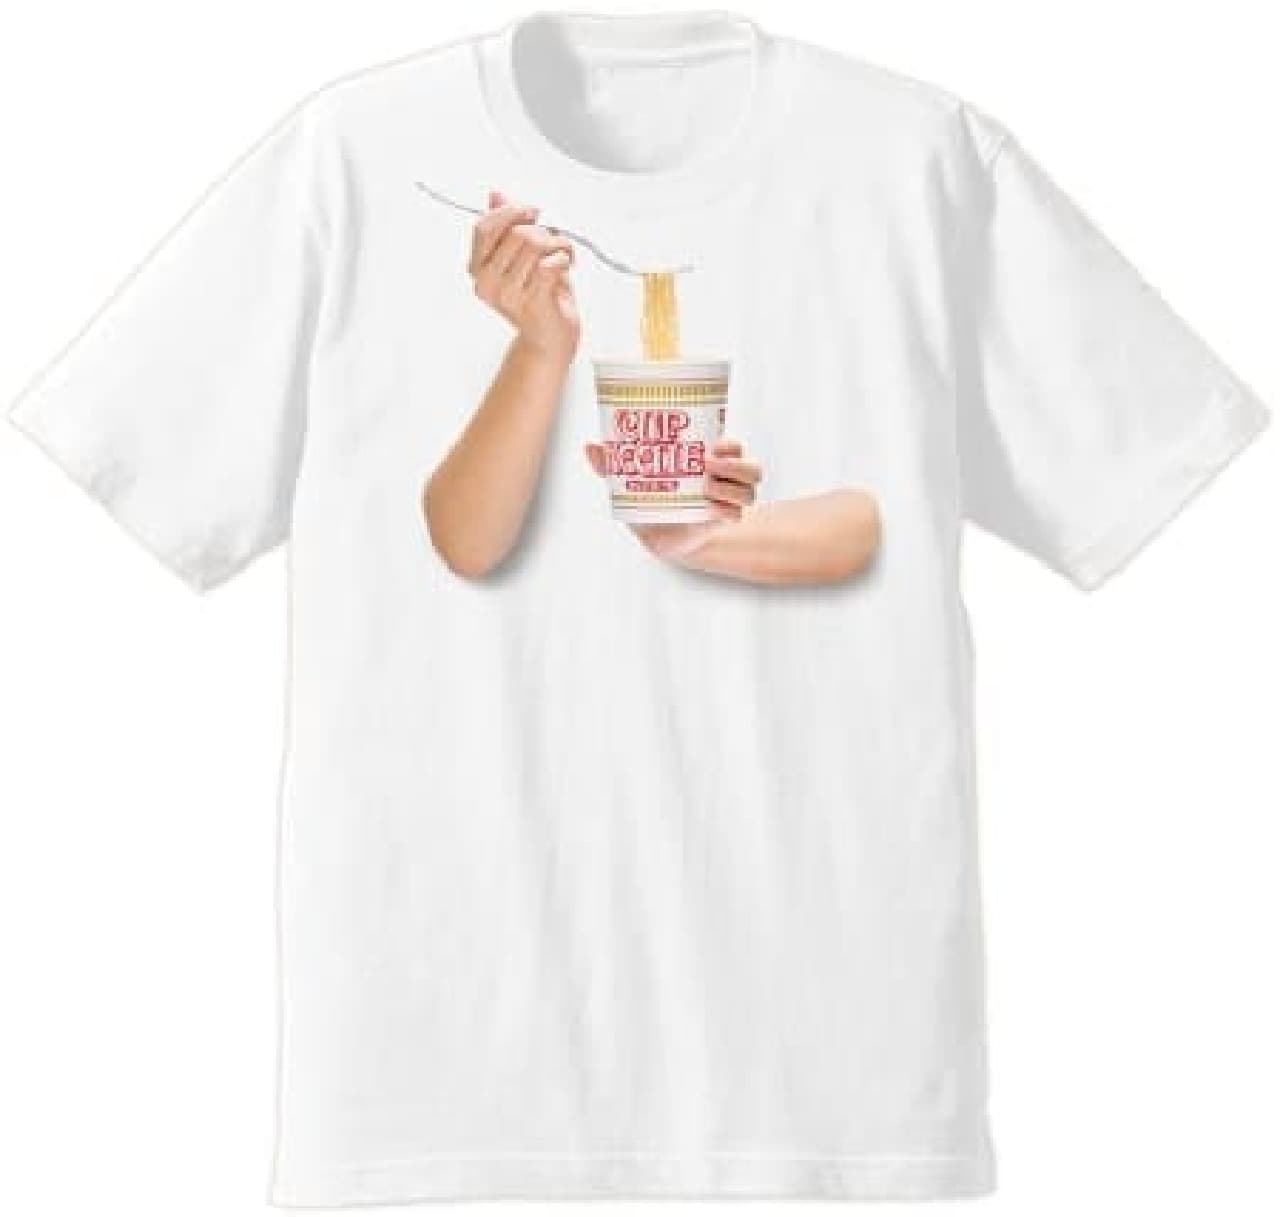 Nissin Foods Official "Cup Noodle Eating Wind T-shirt"